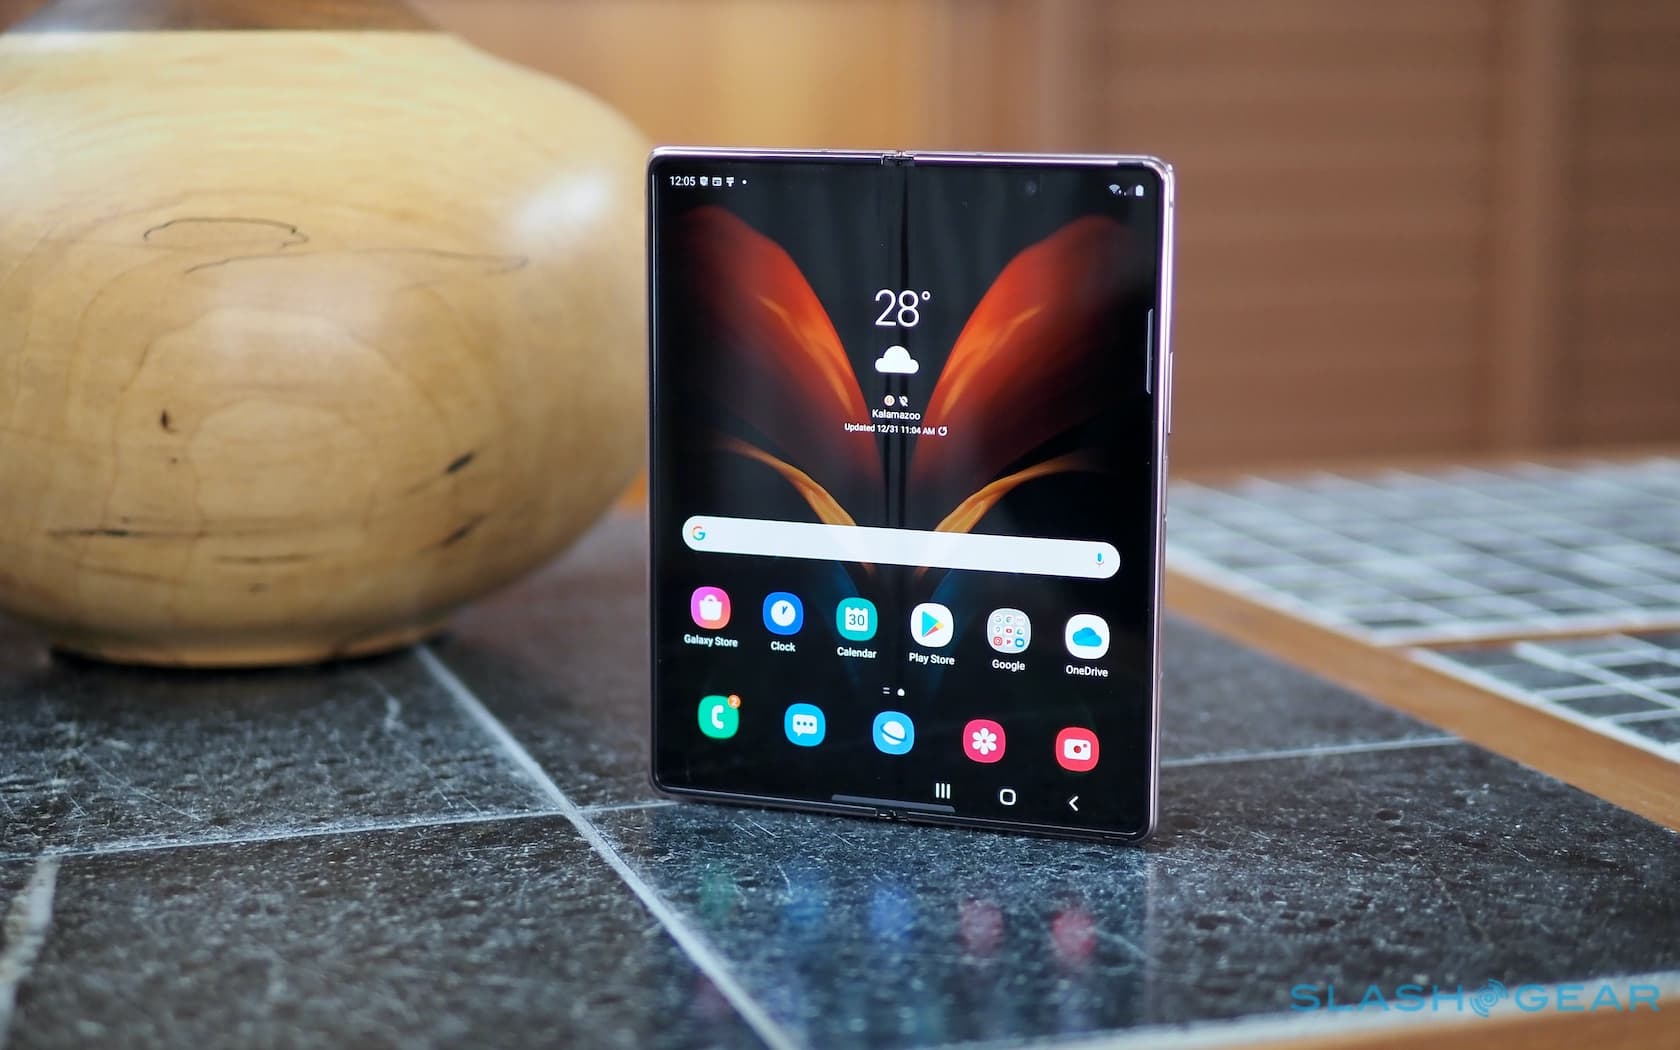 Galaxy Z Fold 3 and Galaxy Z Flip 2 are dispatching sooner than anticipated